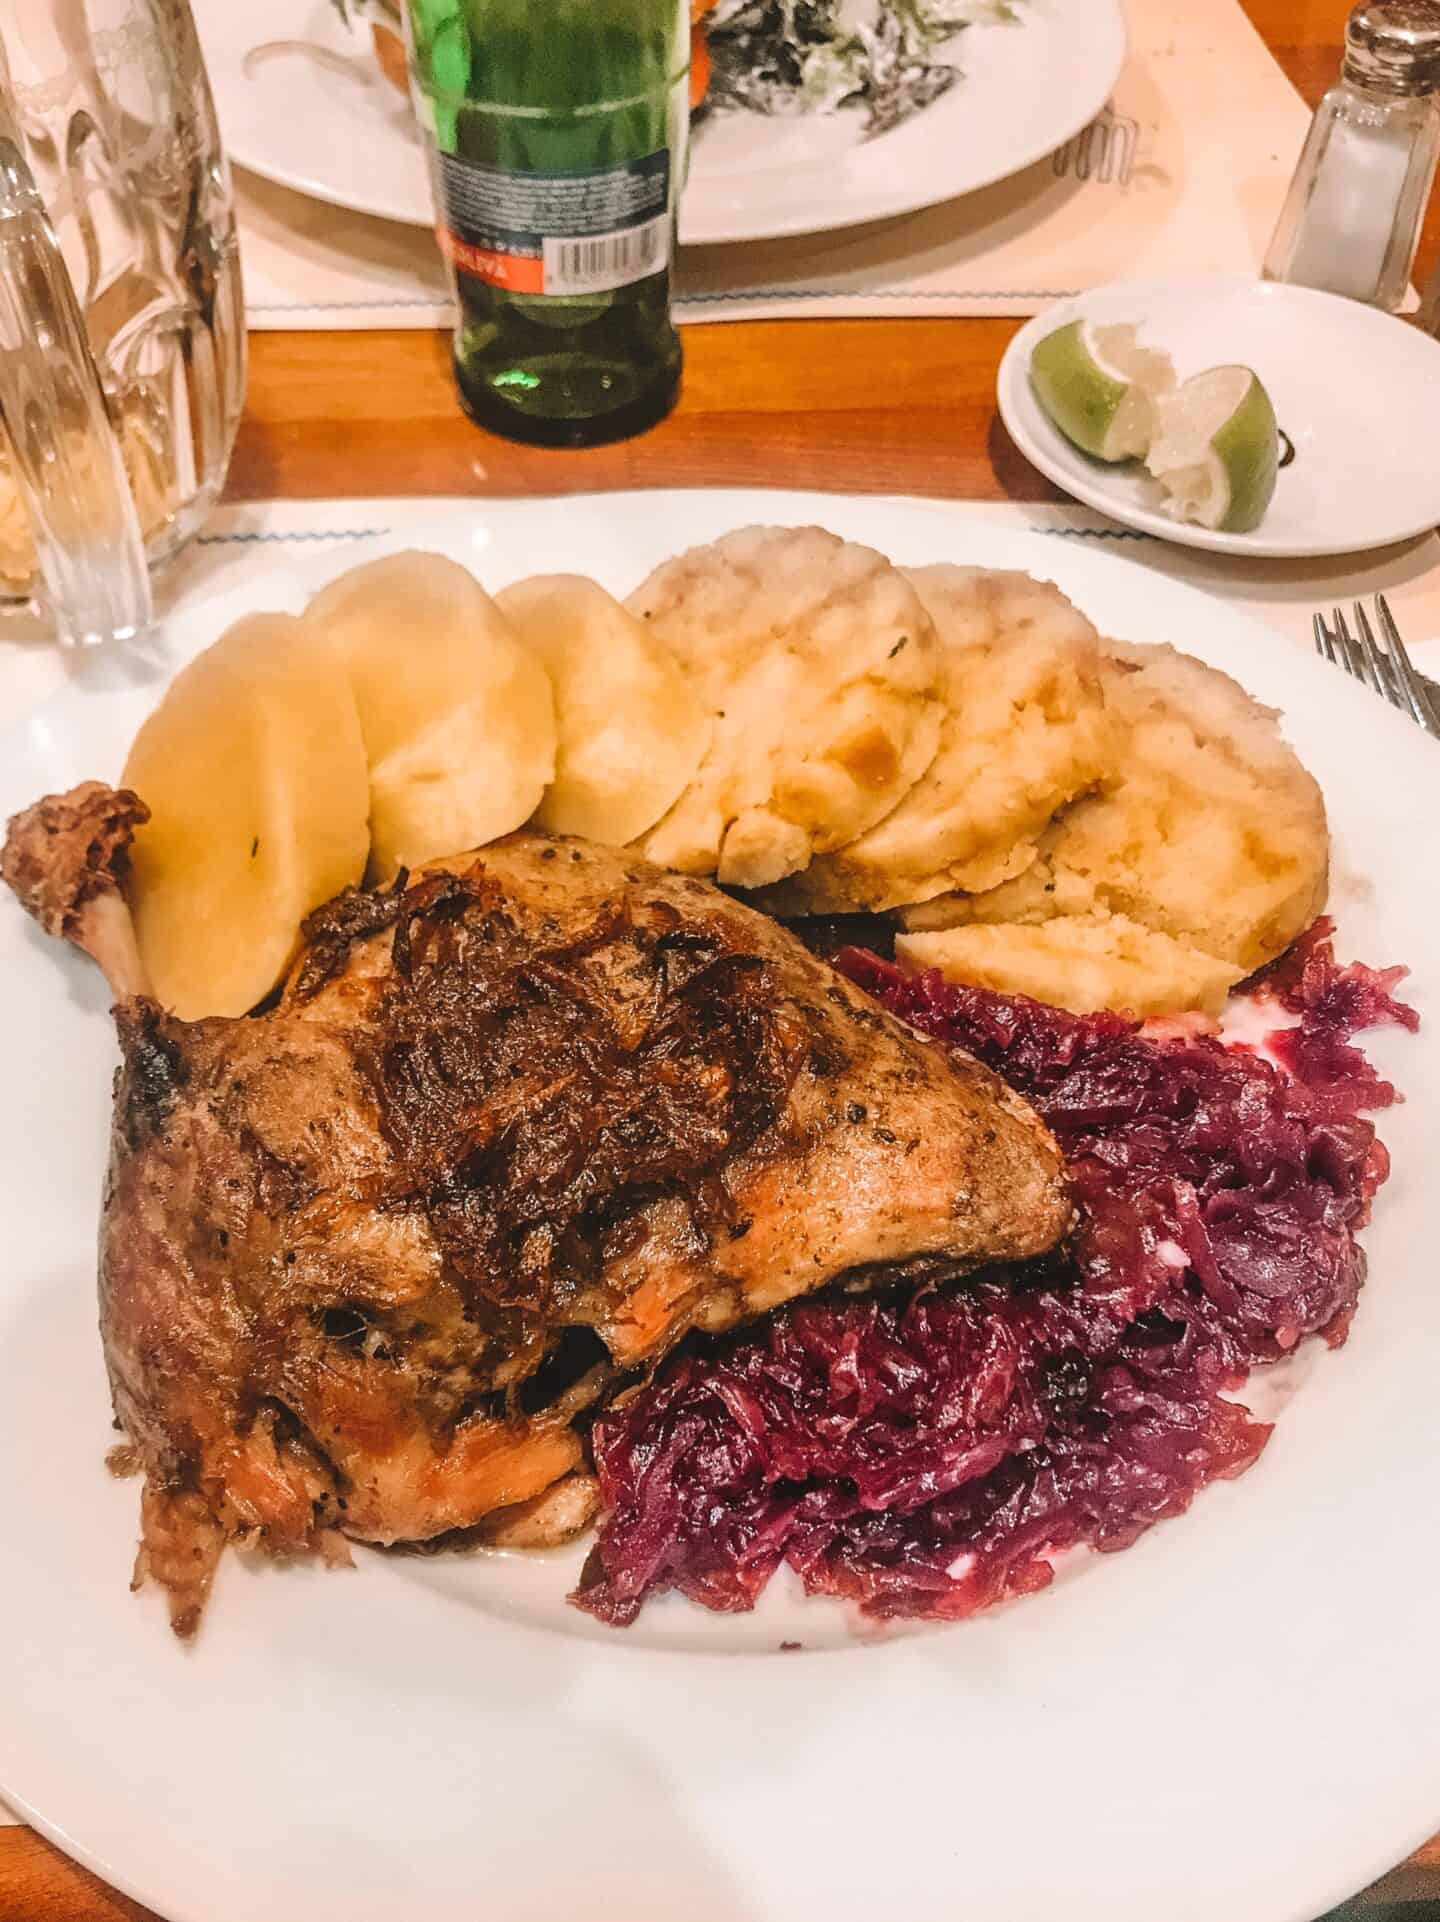 Some of the best Czech food in Prague.